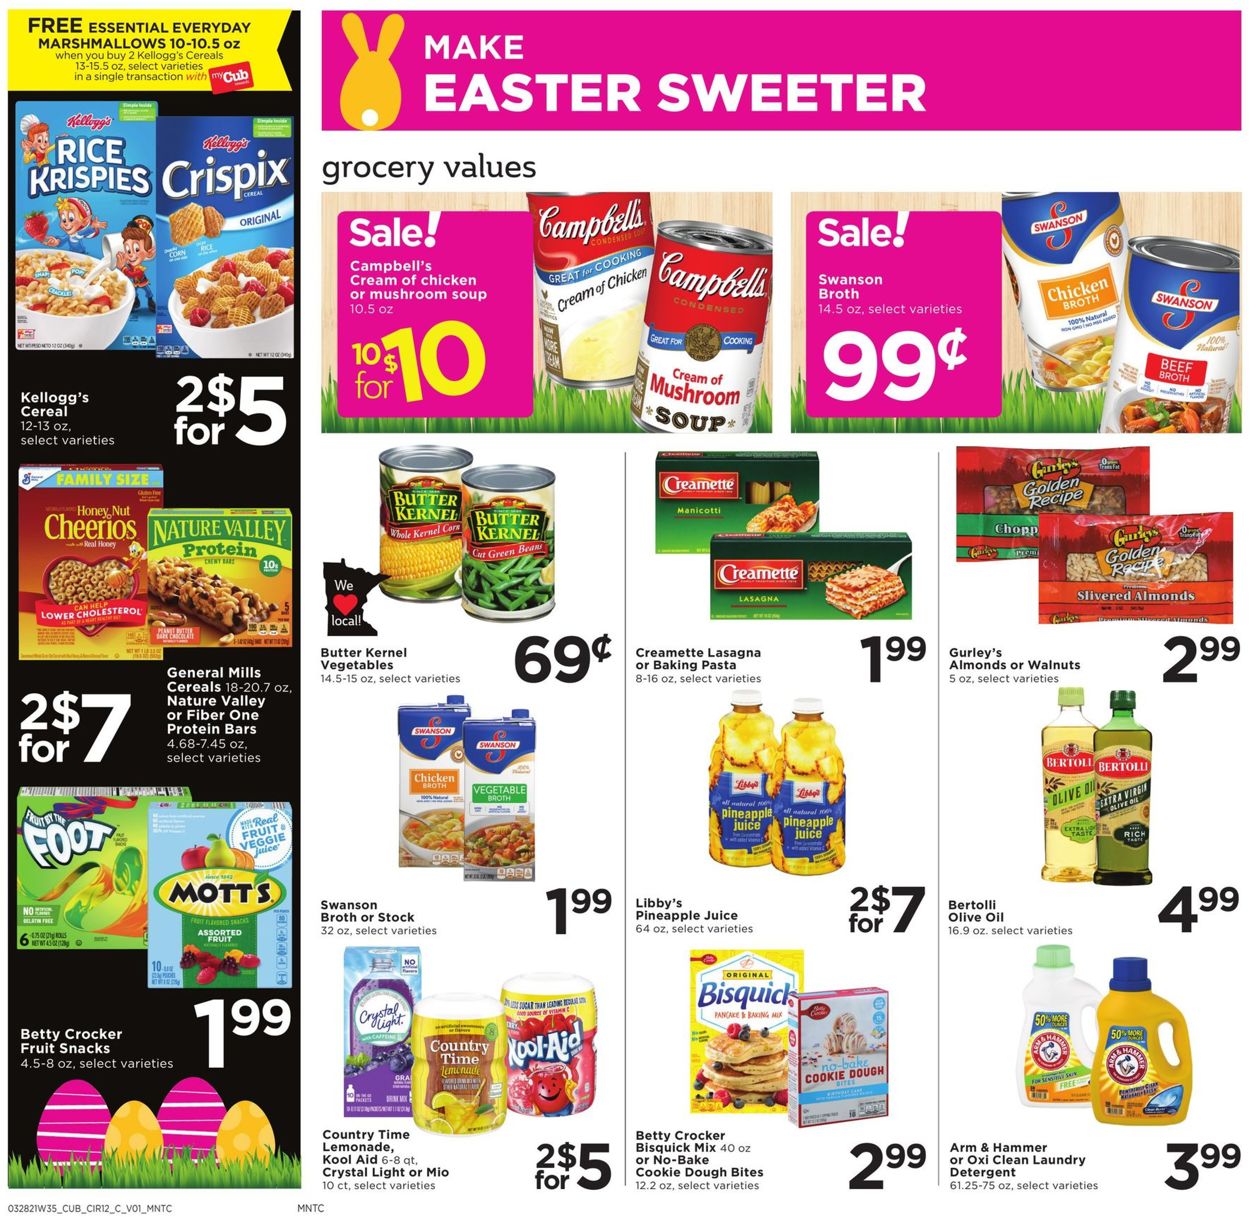 Catalogue Cub Foods - Easter 2021 ad from 03/28/2021